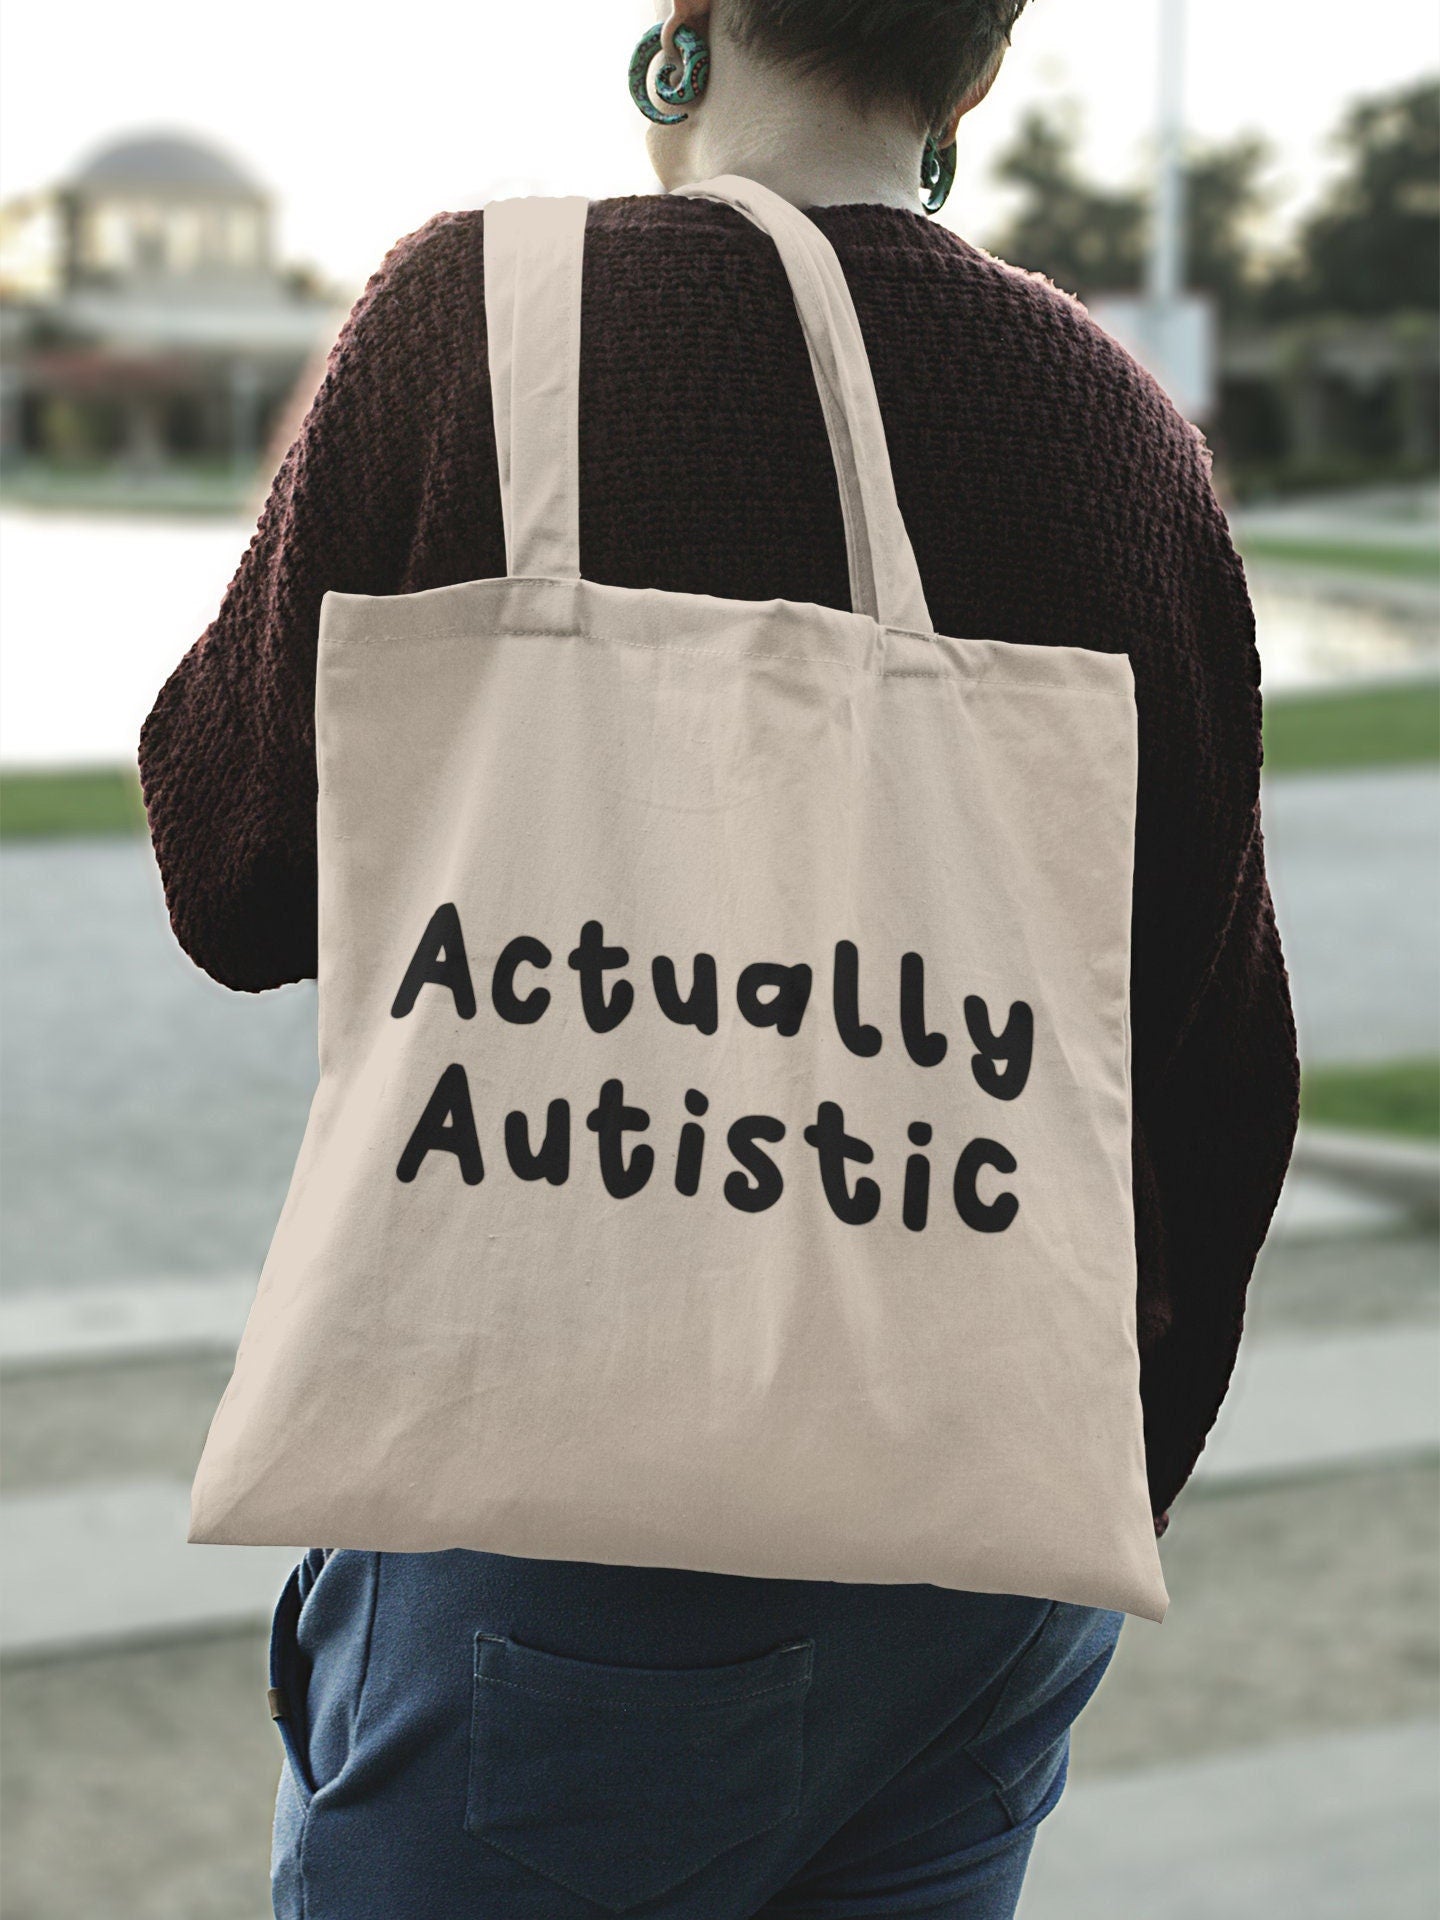 Actually Autistic Tote Bag | Neurodiverse Gift - Autism Gifts - ADHD -  Awareness - Actually Autistic - Reusable Bags